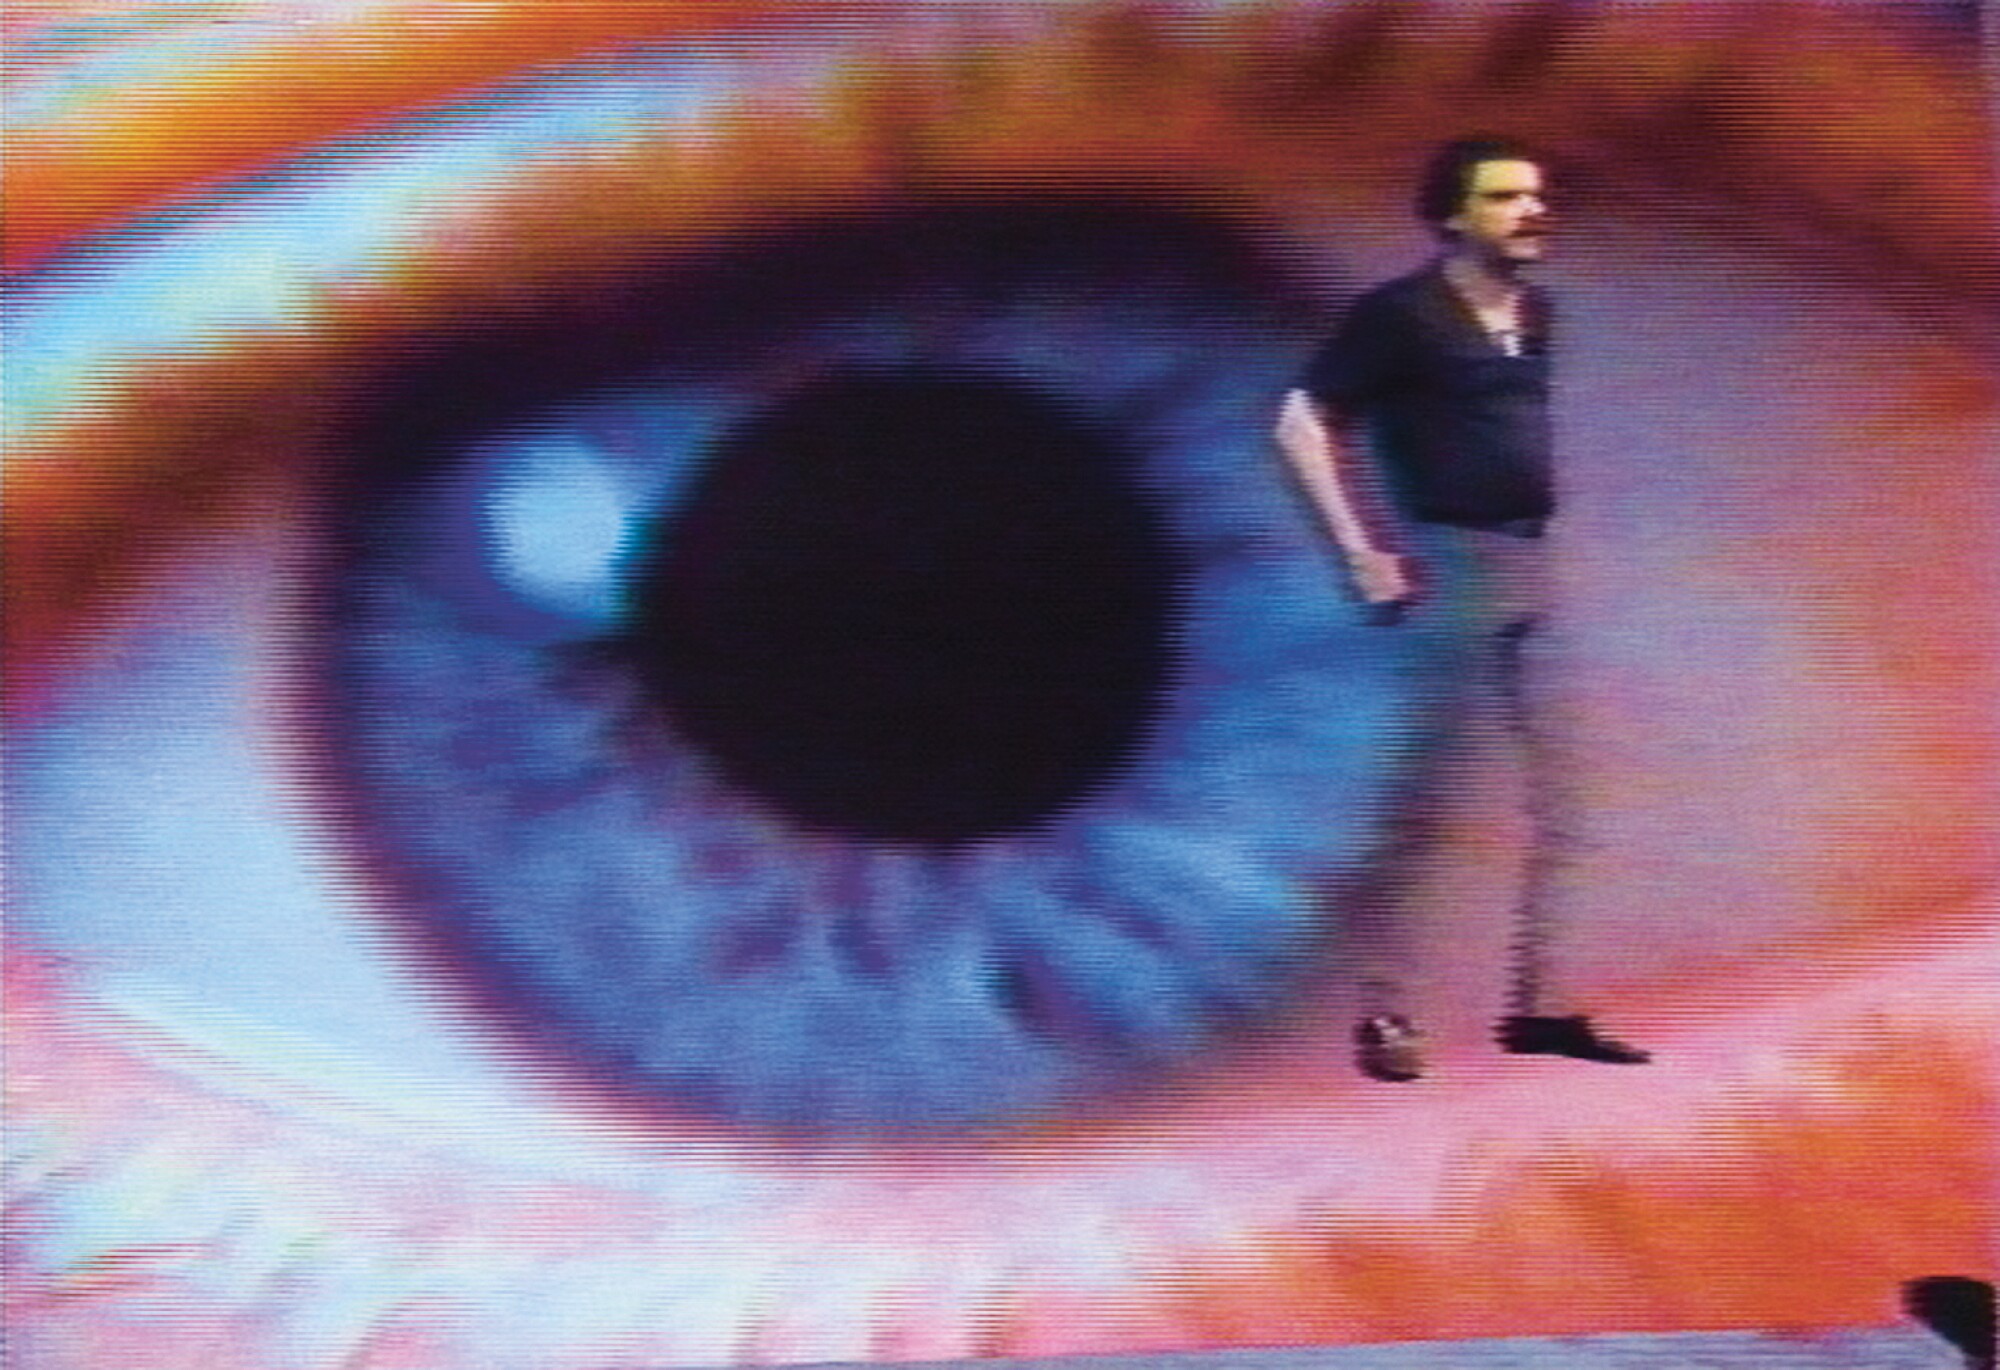 Media scholar Gene Youngblood is seen superimposed over a giant eyeball.